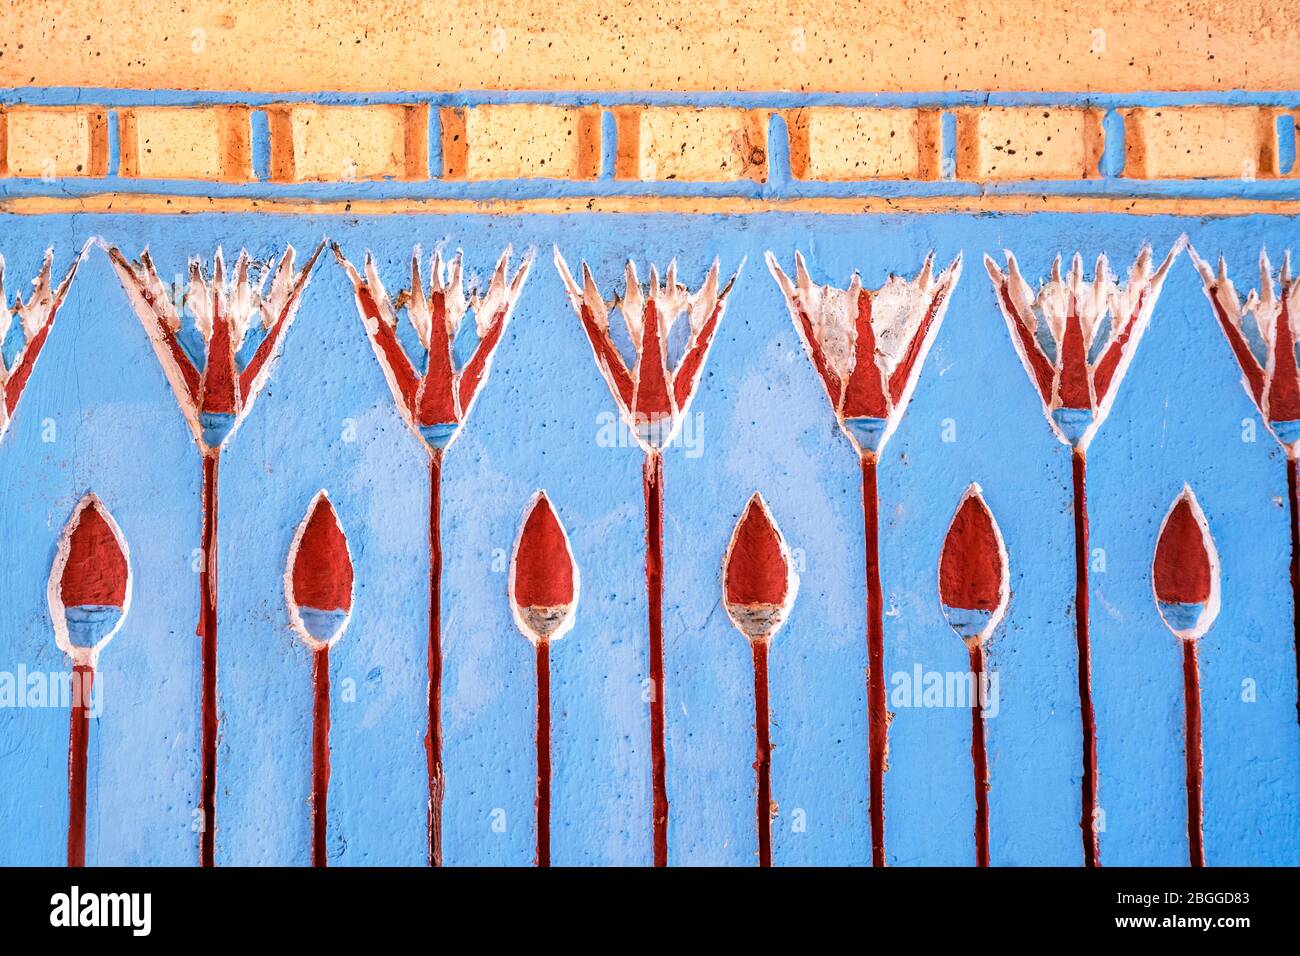 Ouarzazate, Morocco - March 18,2020: Wall decoration at film set of Asterix and Obelix - Mission Cleopatre in Cinema Atlas Studios Stock Photo